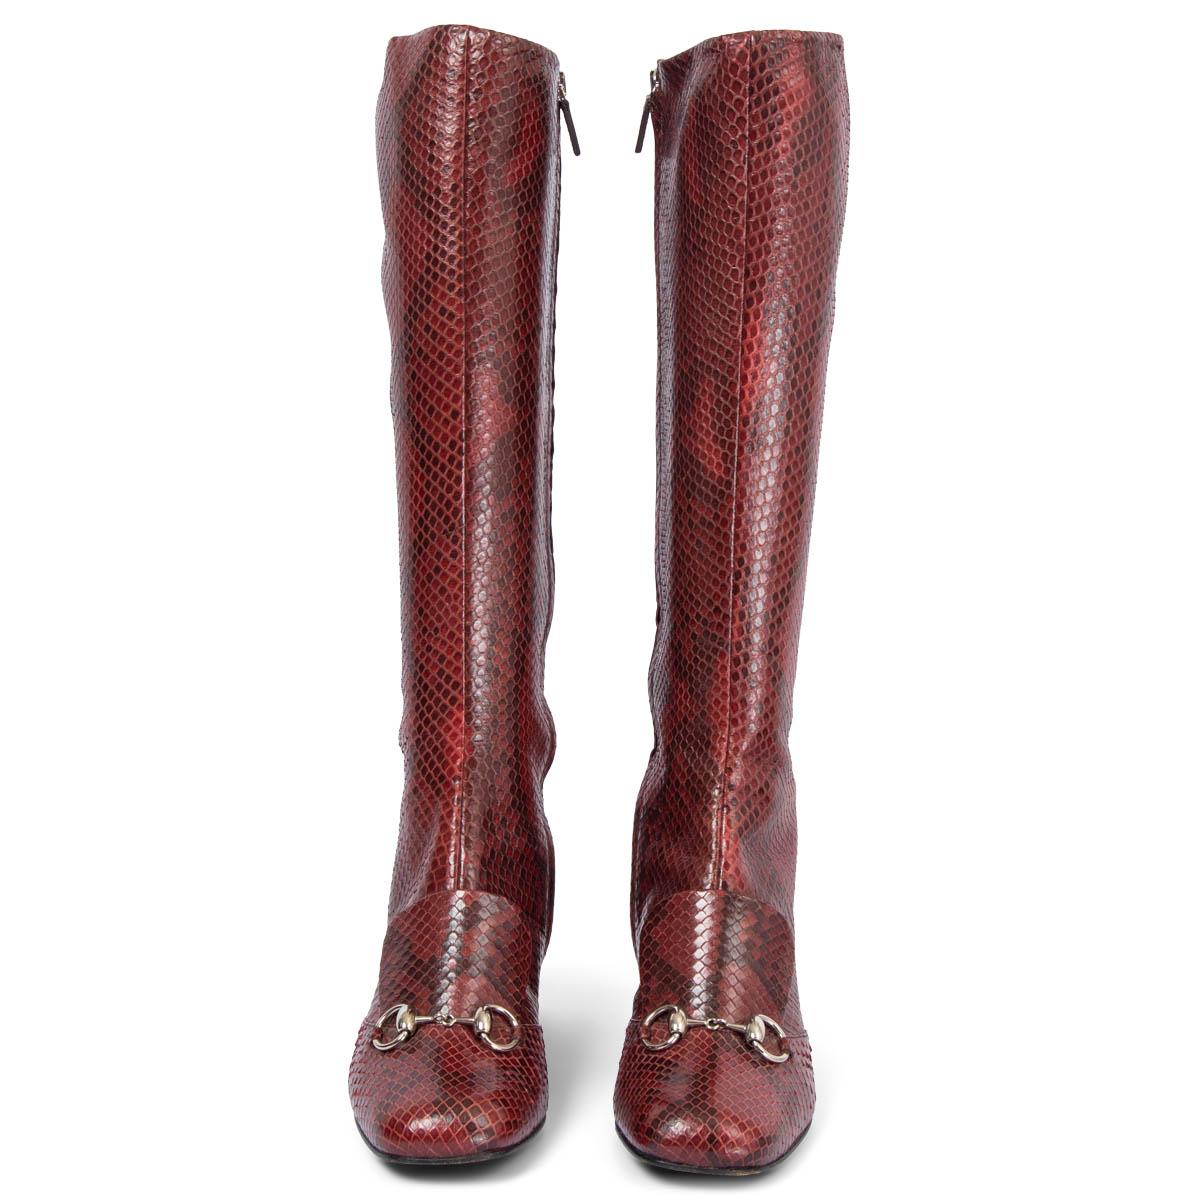 100% authentic Gucci Lillian knee-high boots in burgundy python snakeskin with silver-tone horsebit embellishment. Open with a zipper on the inside. Have been worn and are in excellent condition. 

2014 Fall/Winter

Measurements
Imprinted